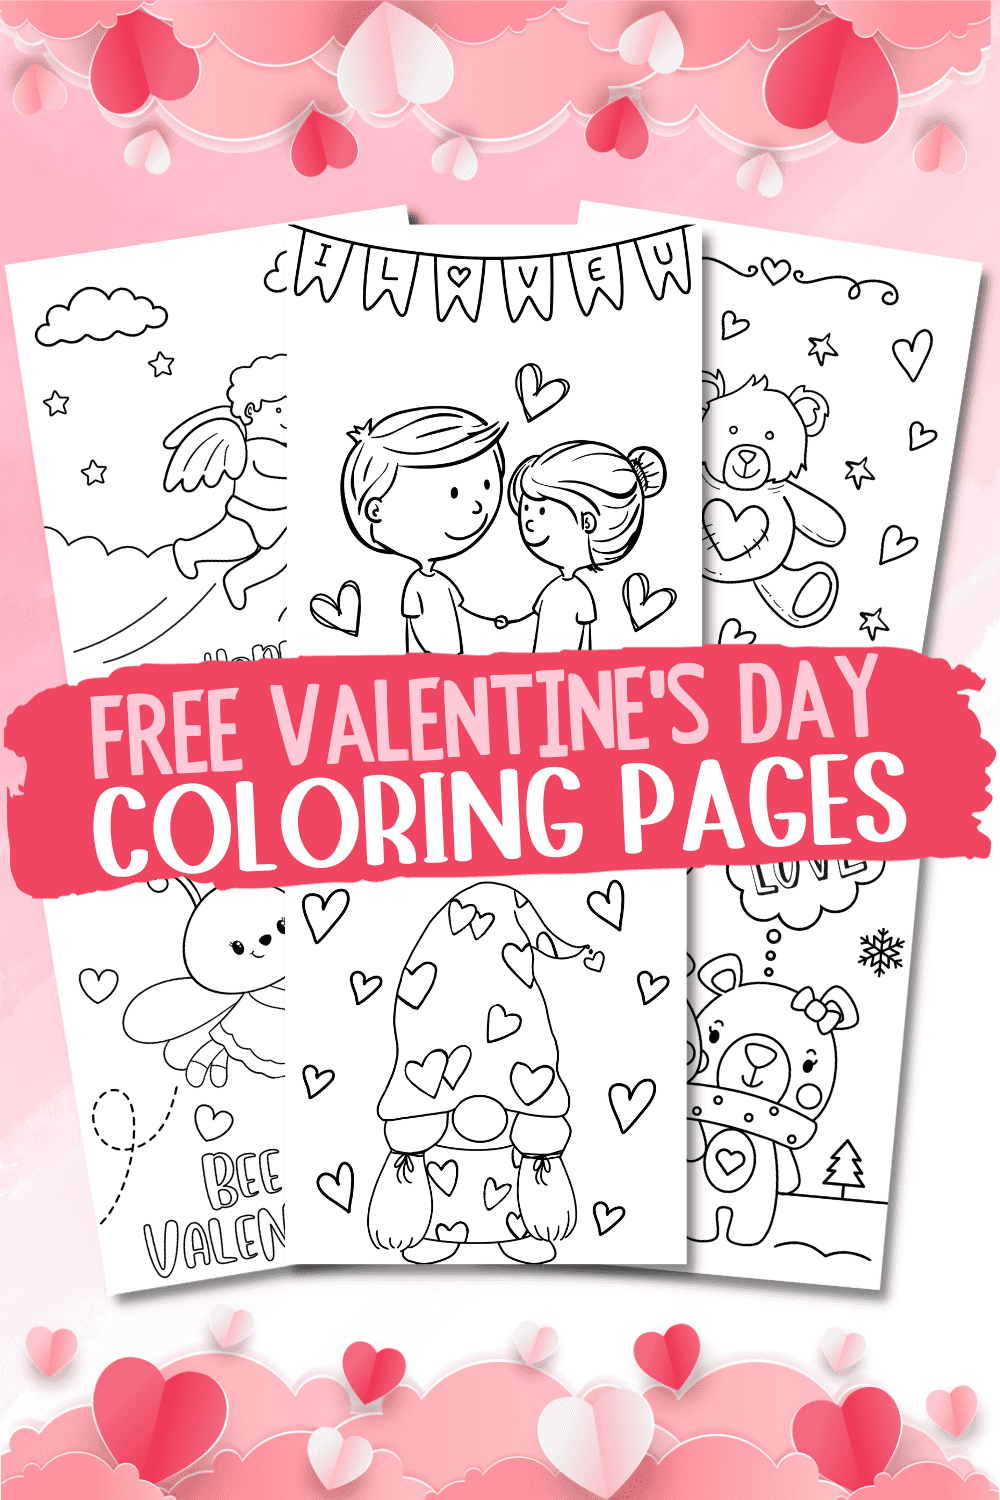 50 Free Printable Valentine's Day Cards